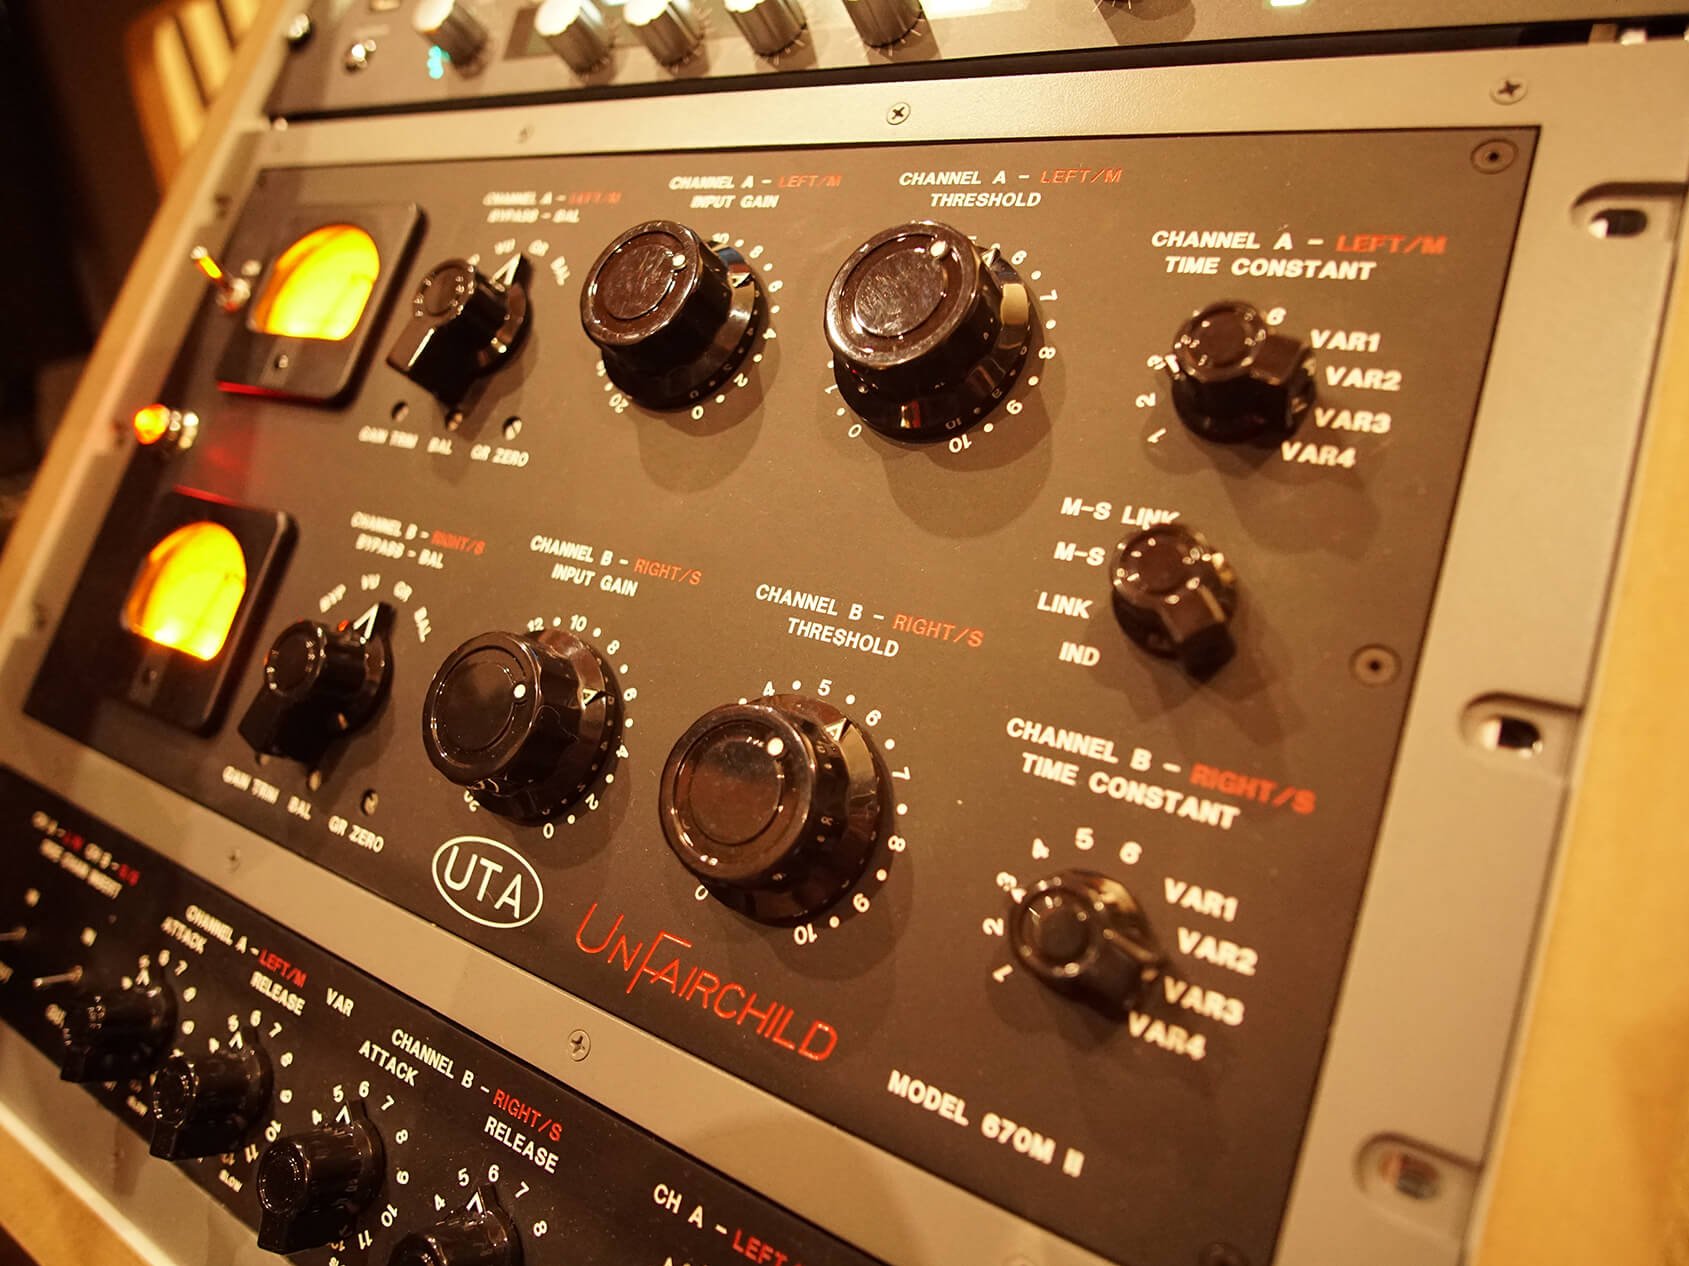 Mixing and mastering with the UTA Unfairchild 670M